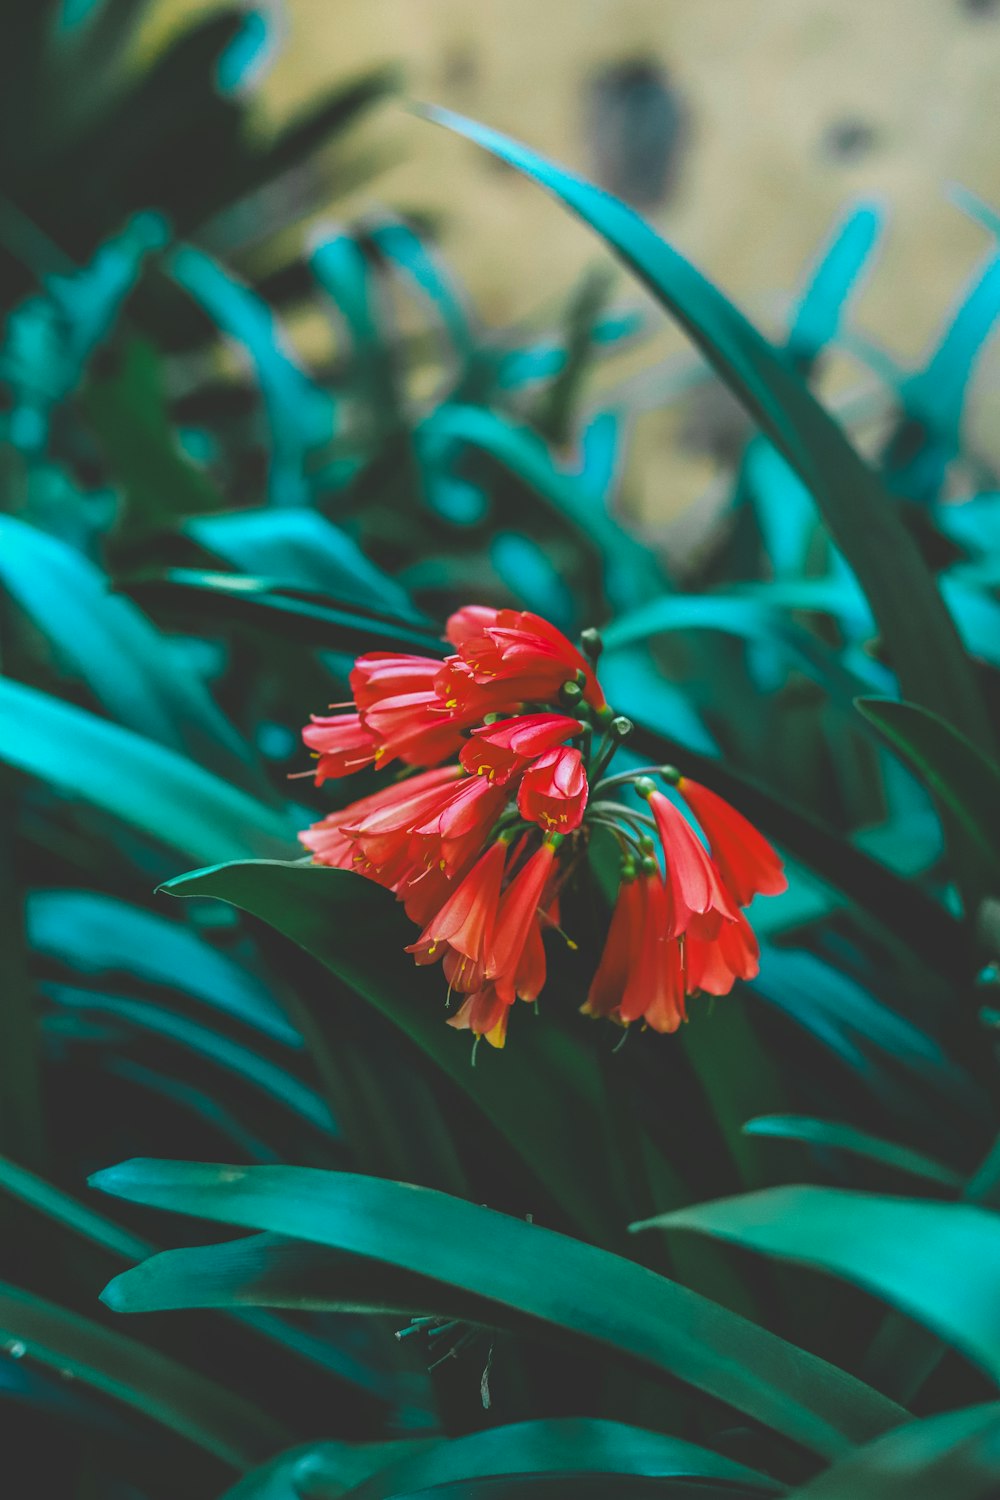 a red flower in the middle of some green plants